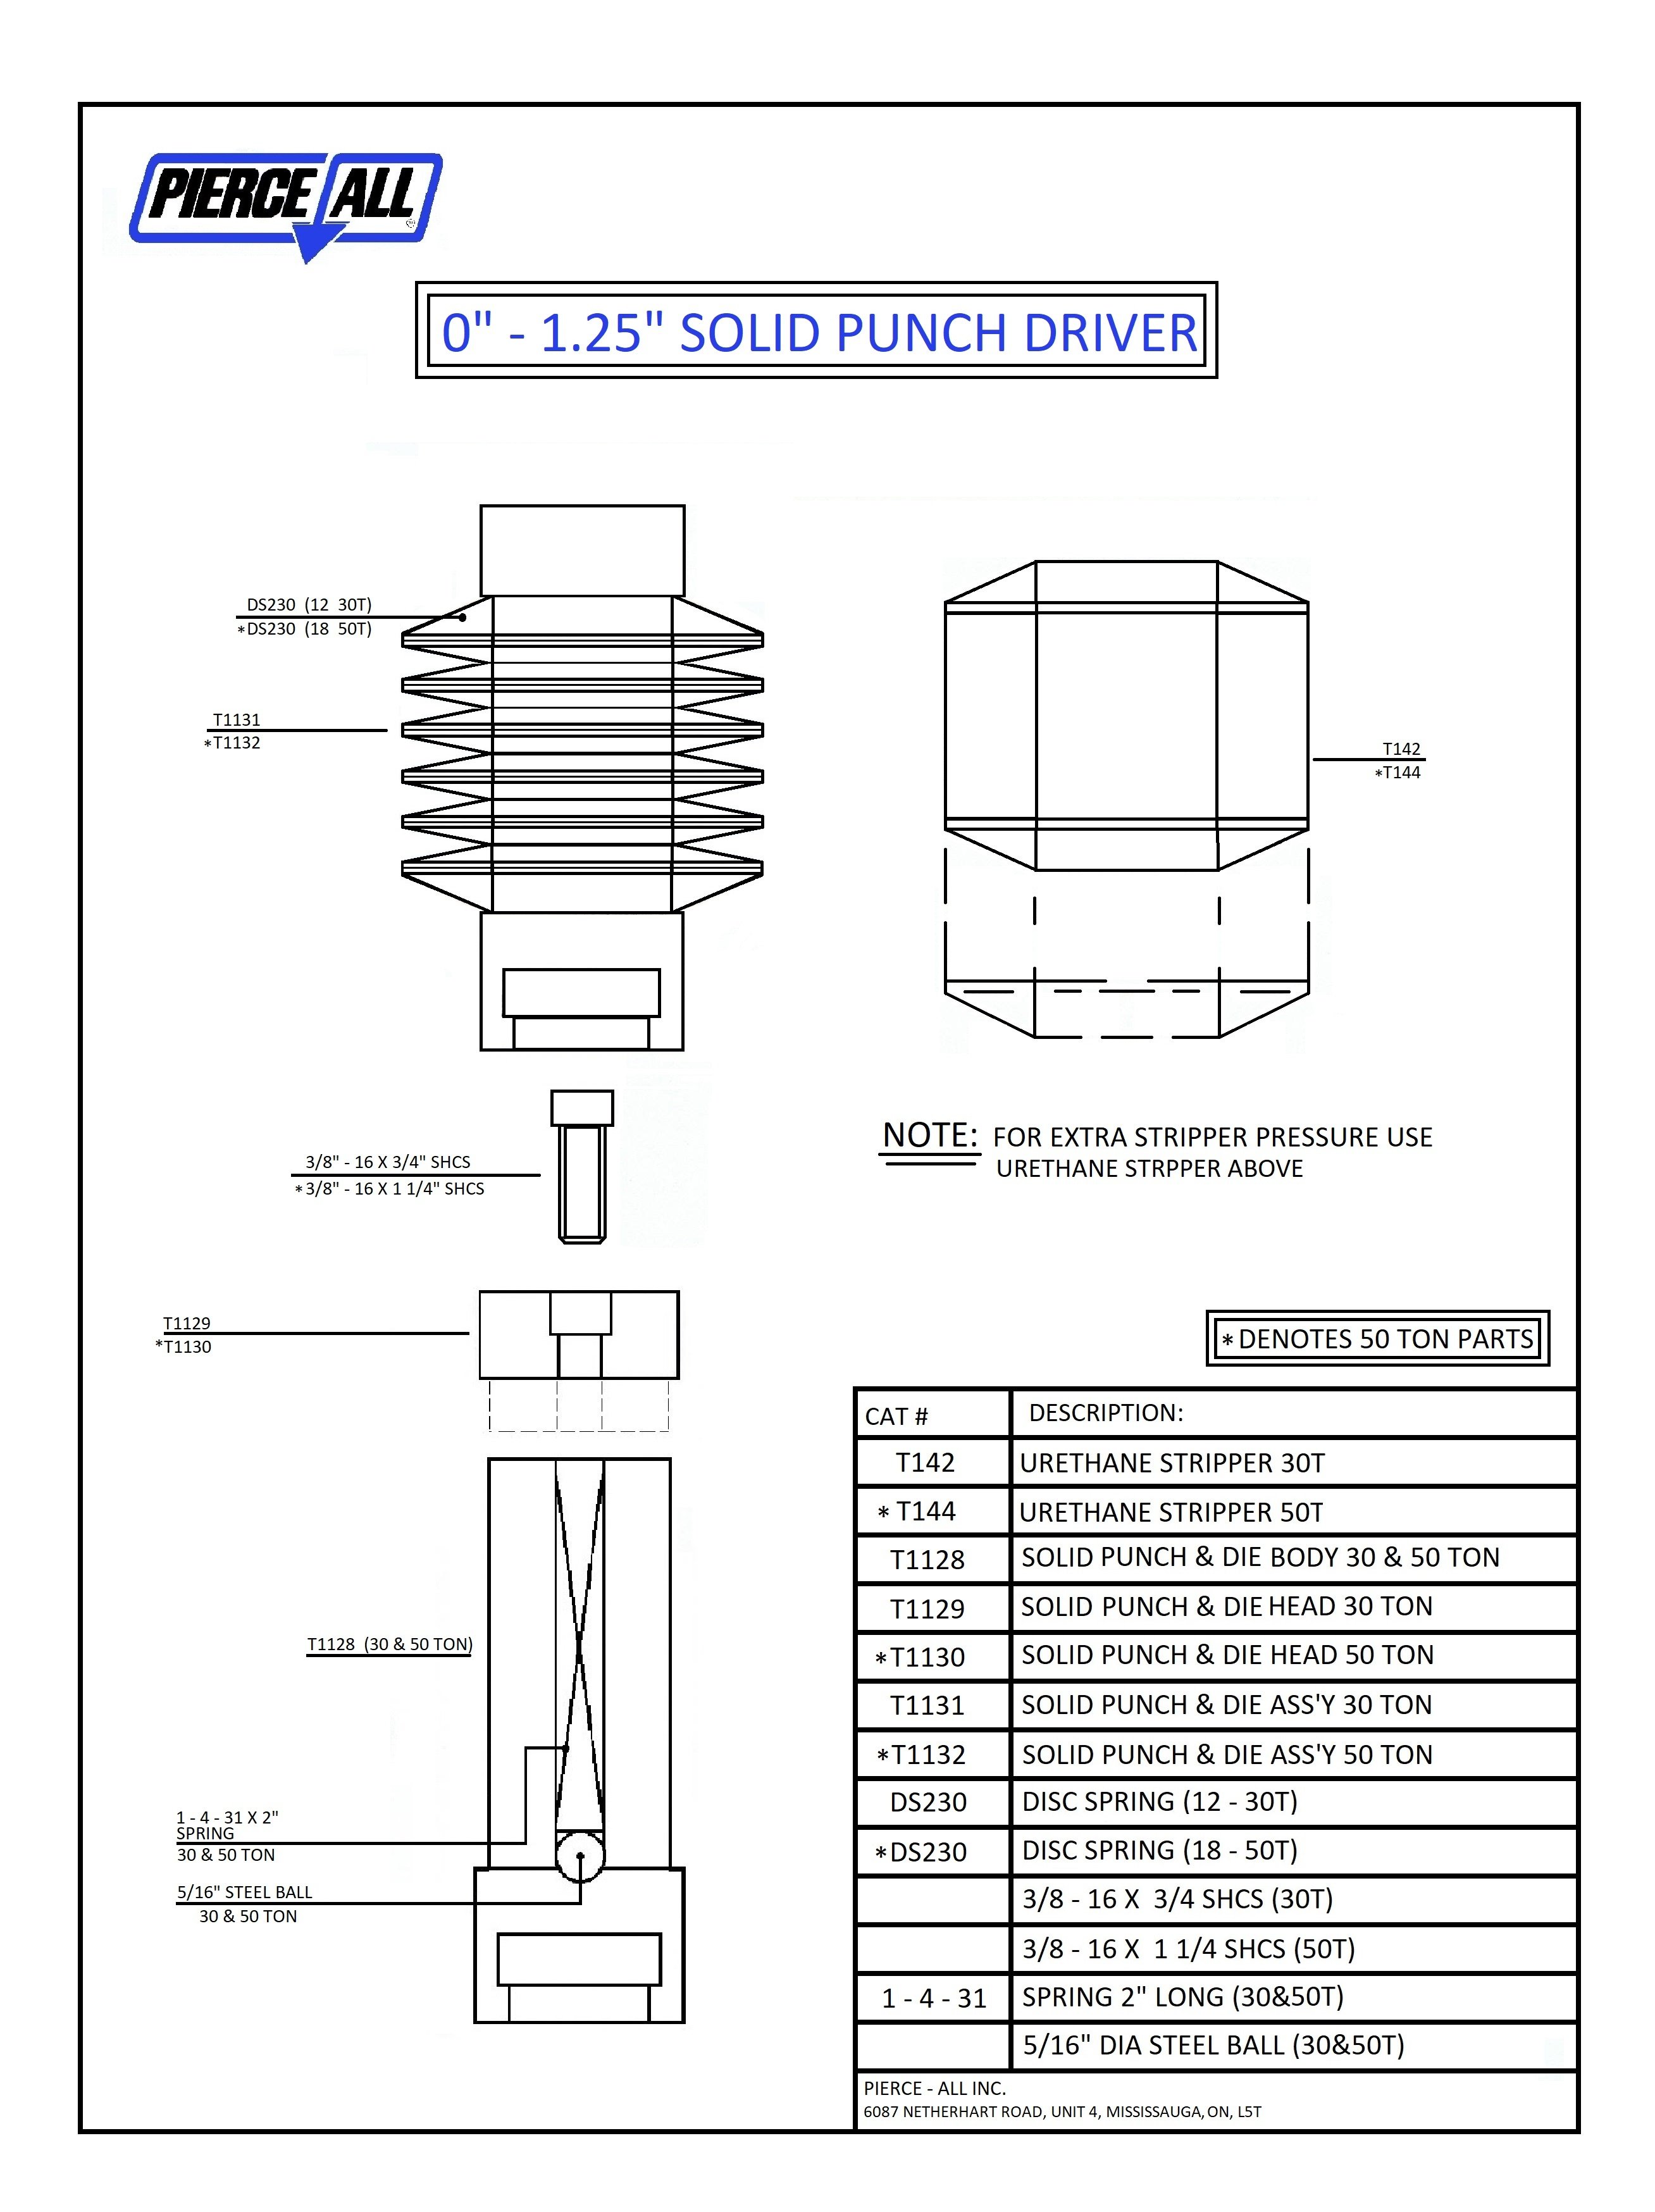 0 - 1.25 - SOLID PUNCH DRIVER